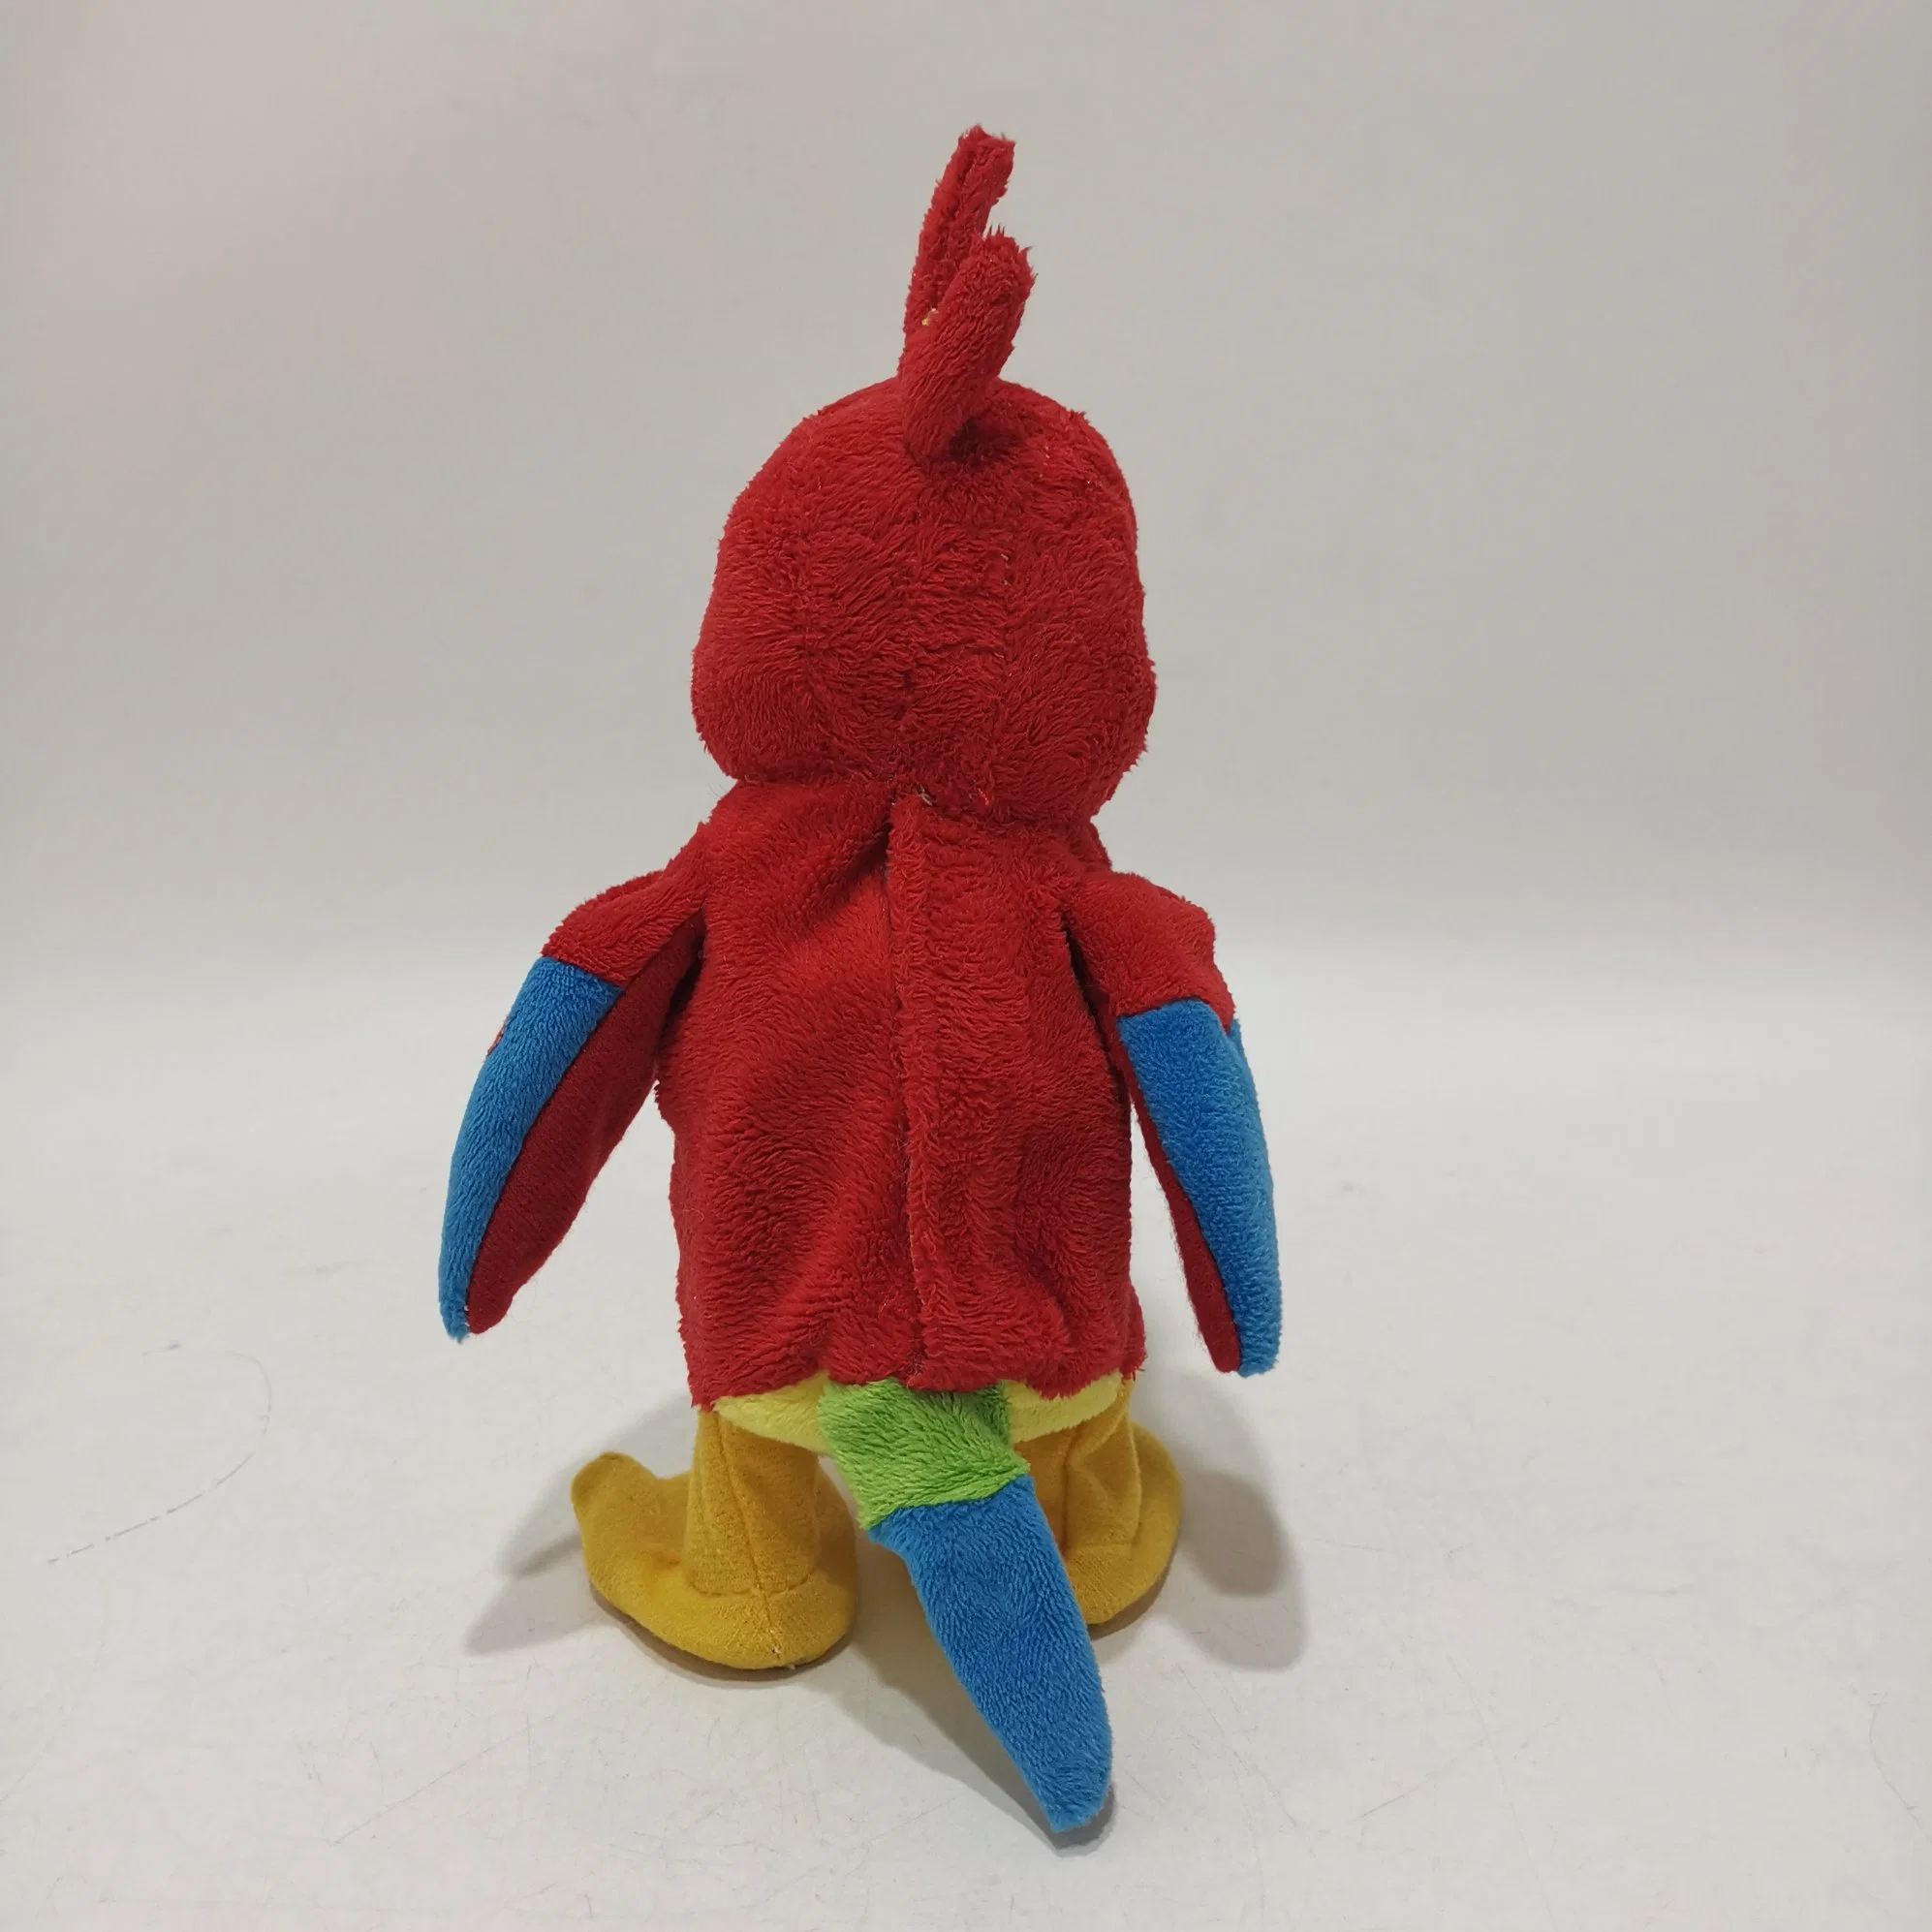 Amazon Hot Selling Item Animated Parrot Talking Back Plush Toys Fun Gifts for Children Play with Other BSCI Factory